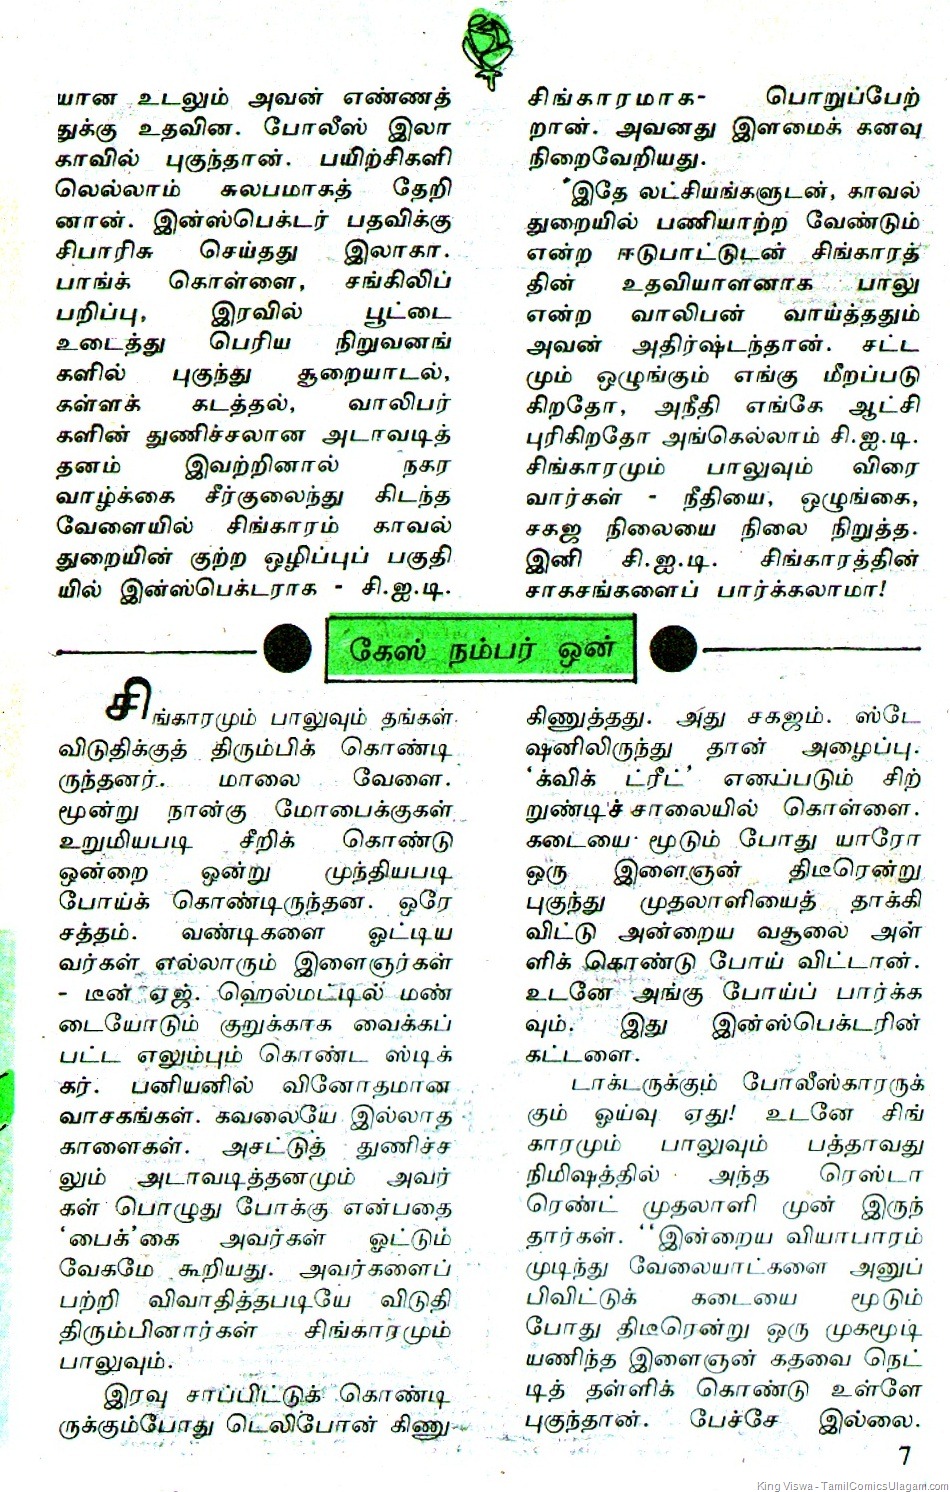 [Poonthalir Issue No 104 Vol 5 Issue 8 Issue Dated 16th Jan 1989 CID Singaram Case 01 Page 002[3].jpg]